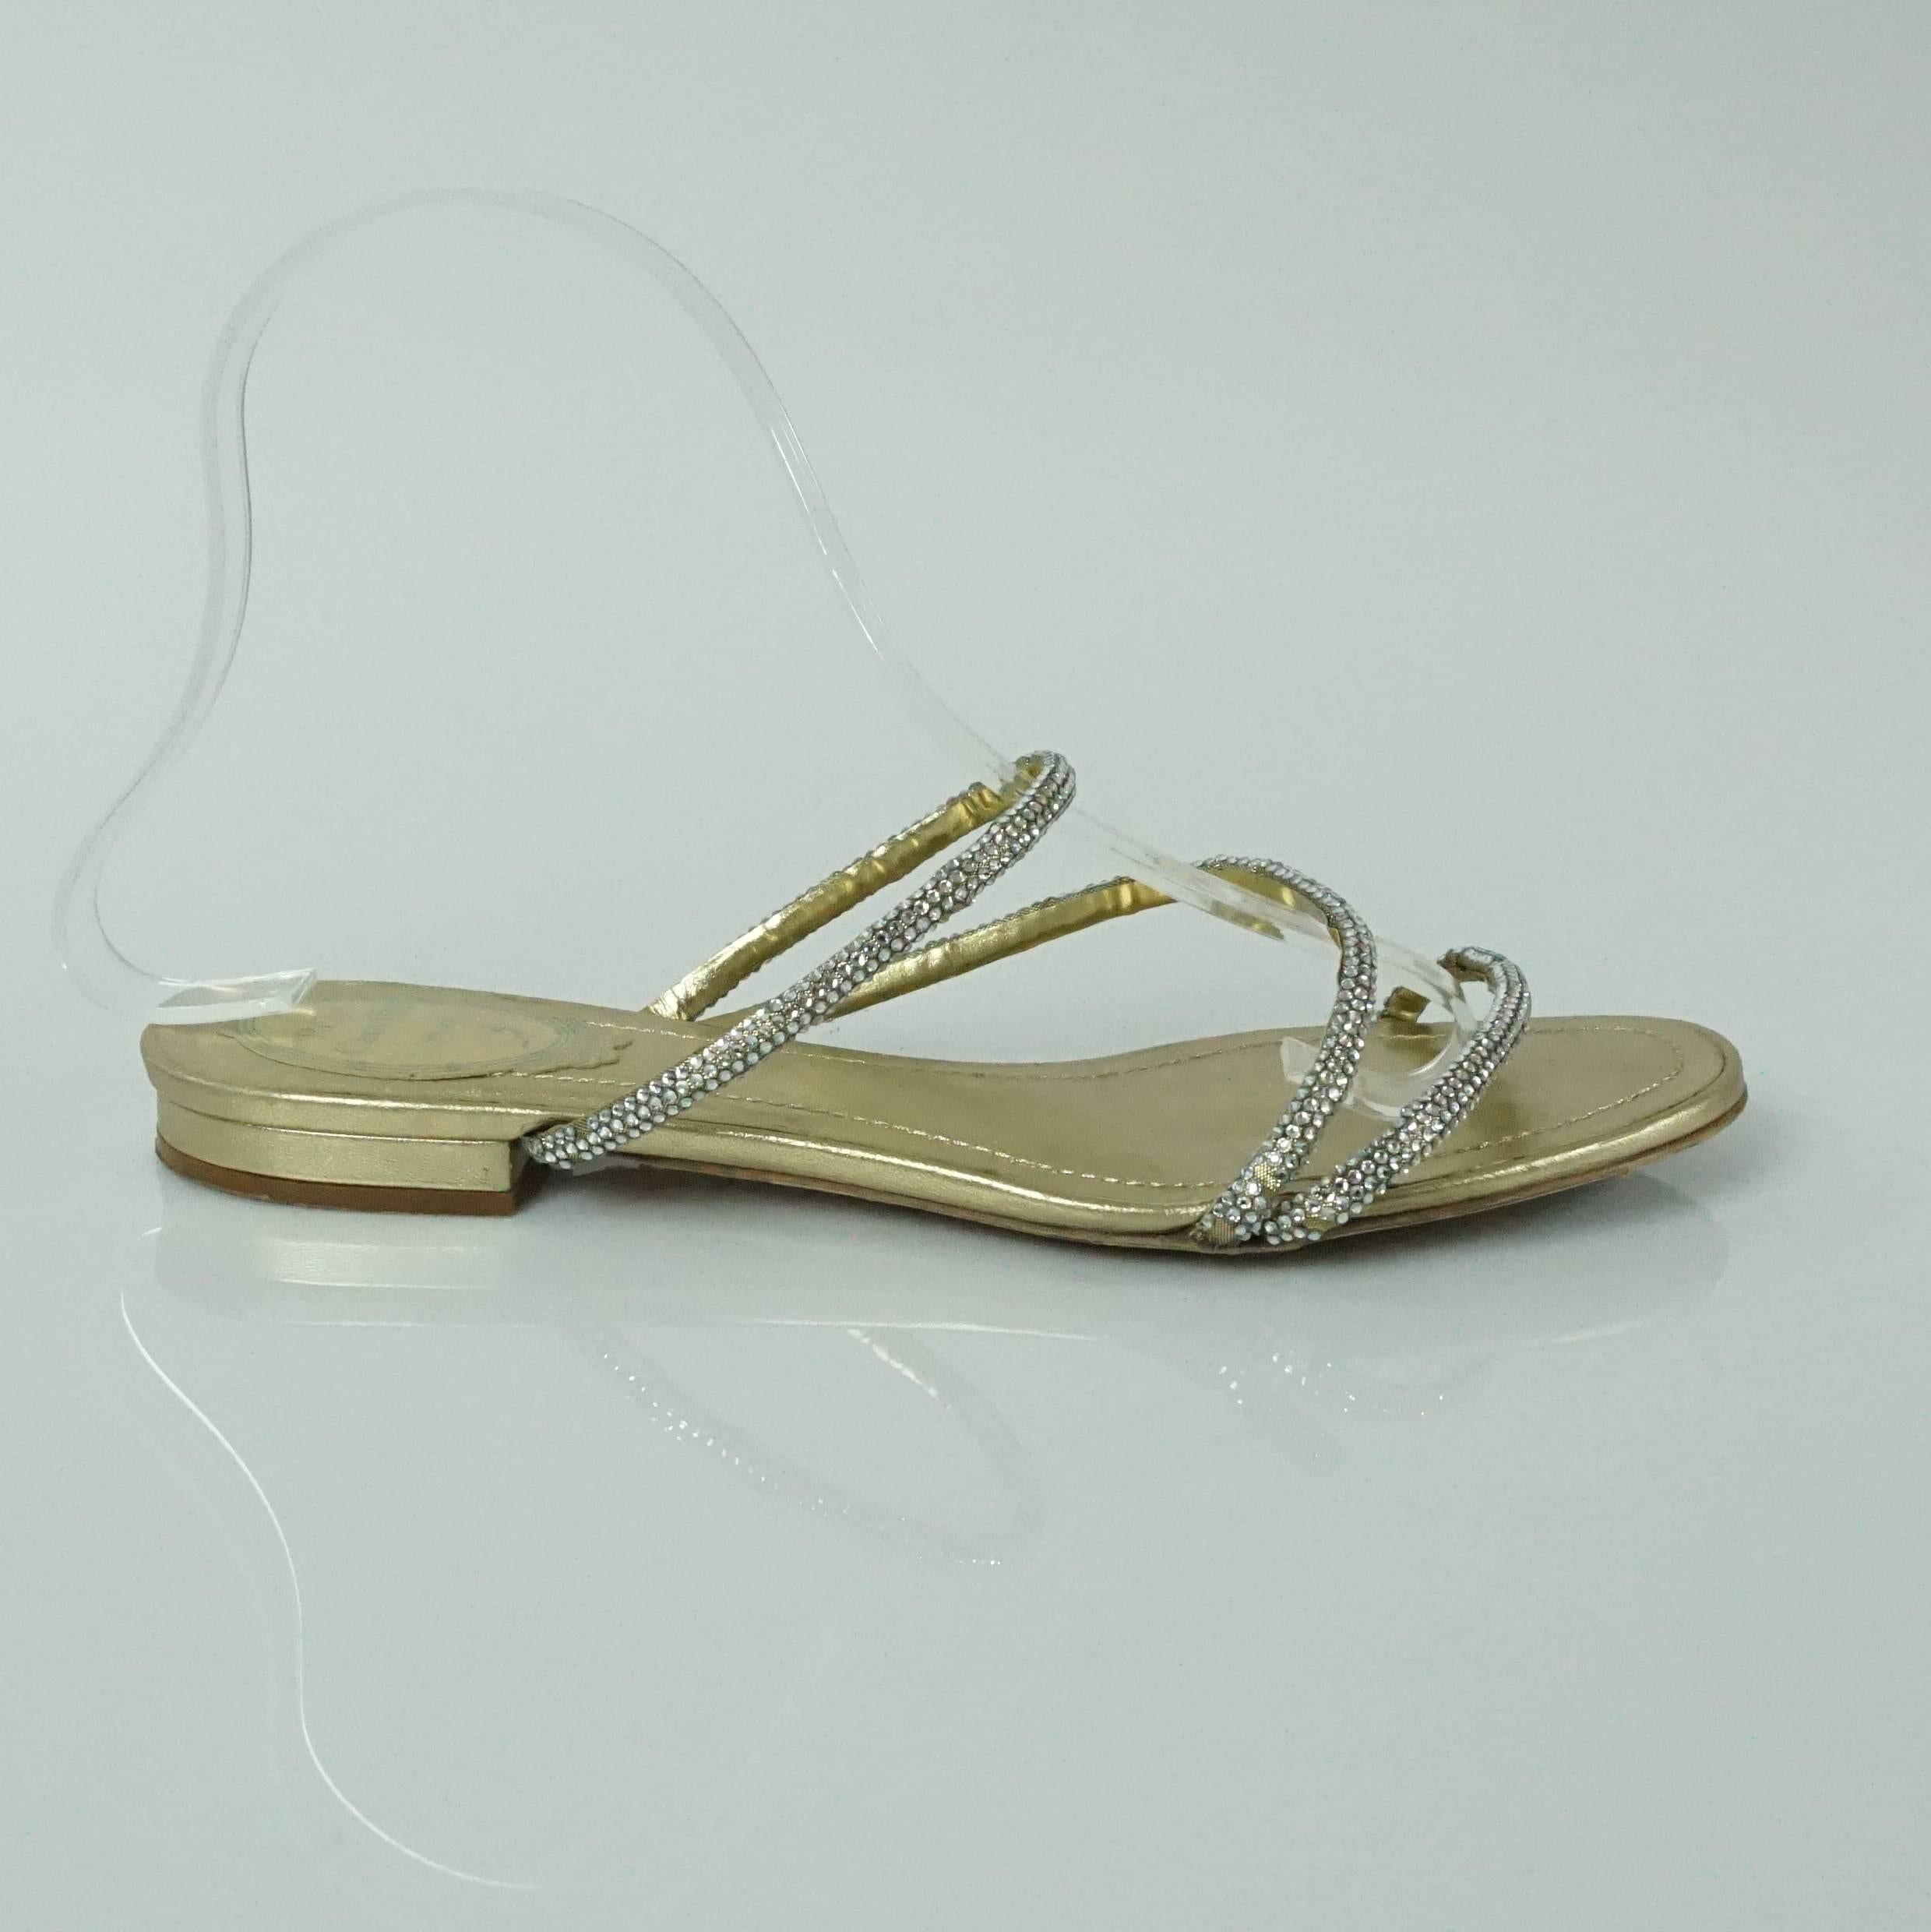 These flat sandals are strappy, They are gold and have 3 straps on them covered in rhinestones. They are in good condition with minor wear on the bottom and some missing stones (see pictures).

Measurements
Heel: 0.5"